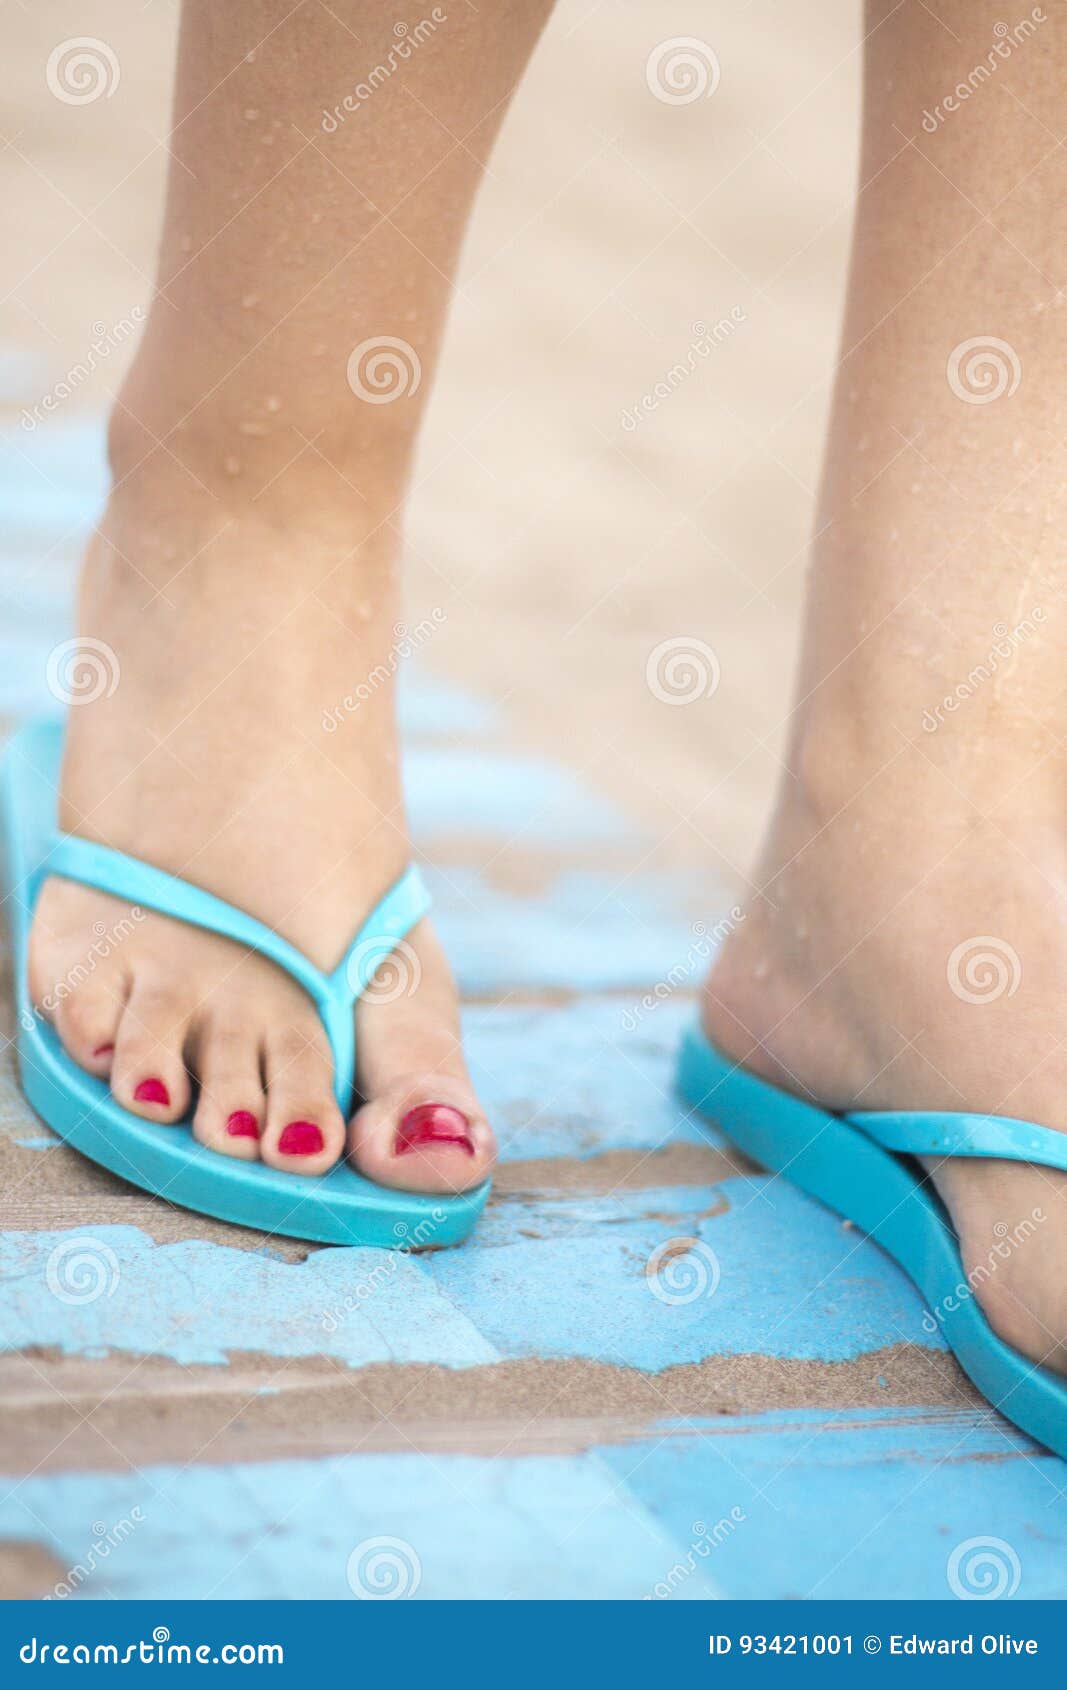 Lady& X27;s Feet in Sandals on Beach Stock Image - Image of blue, cosmetic:  93421001